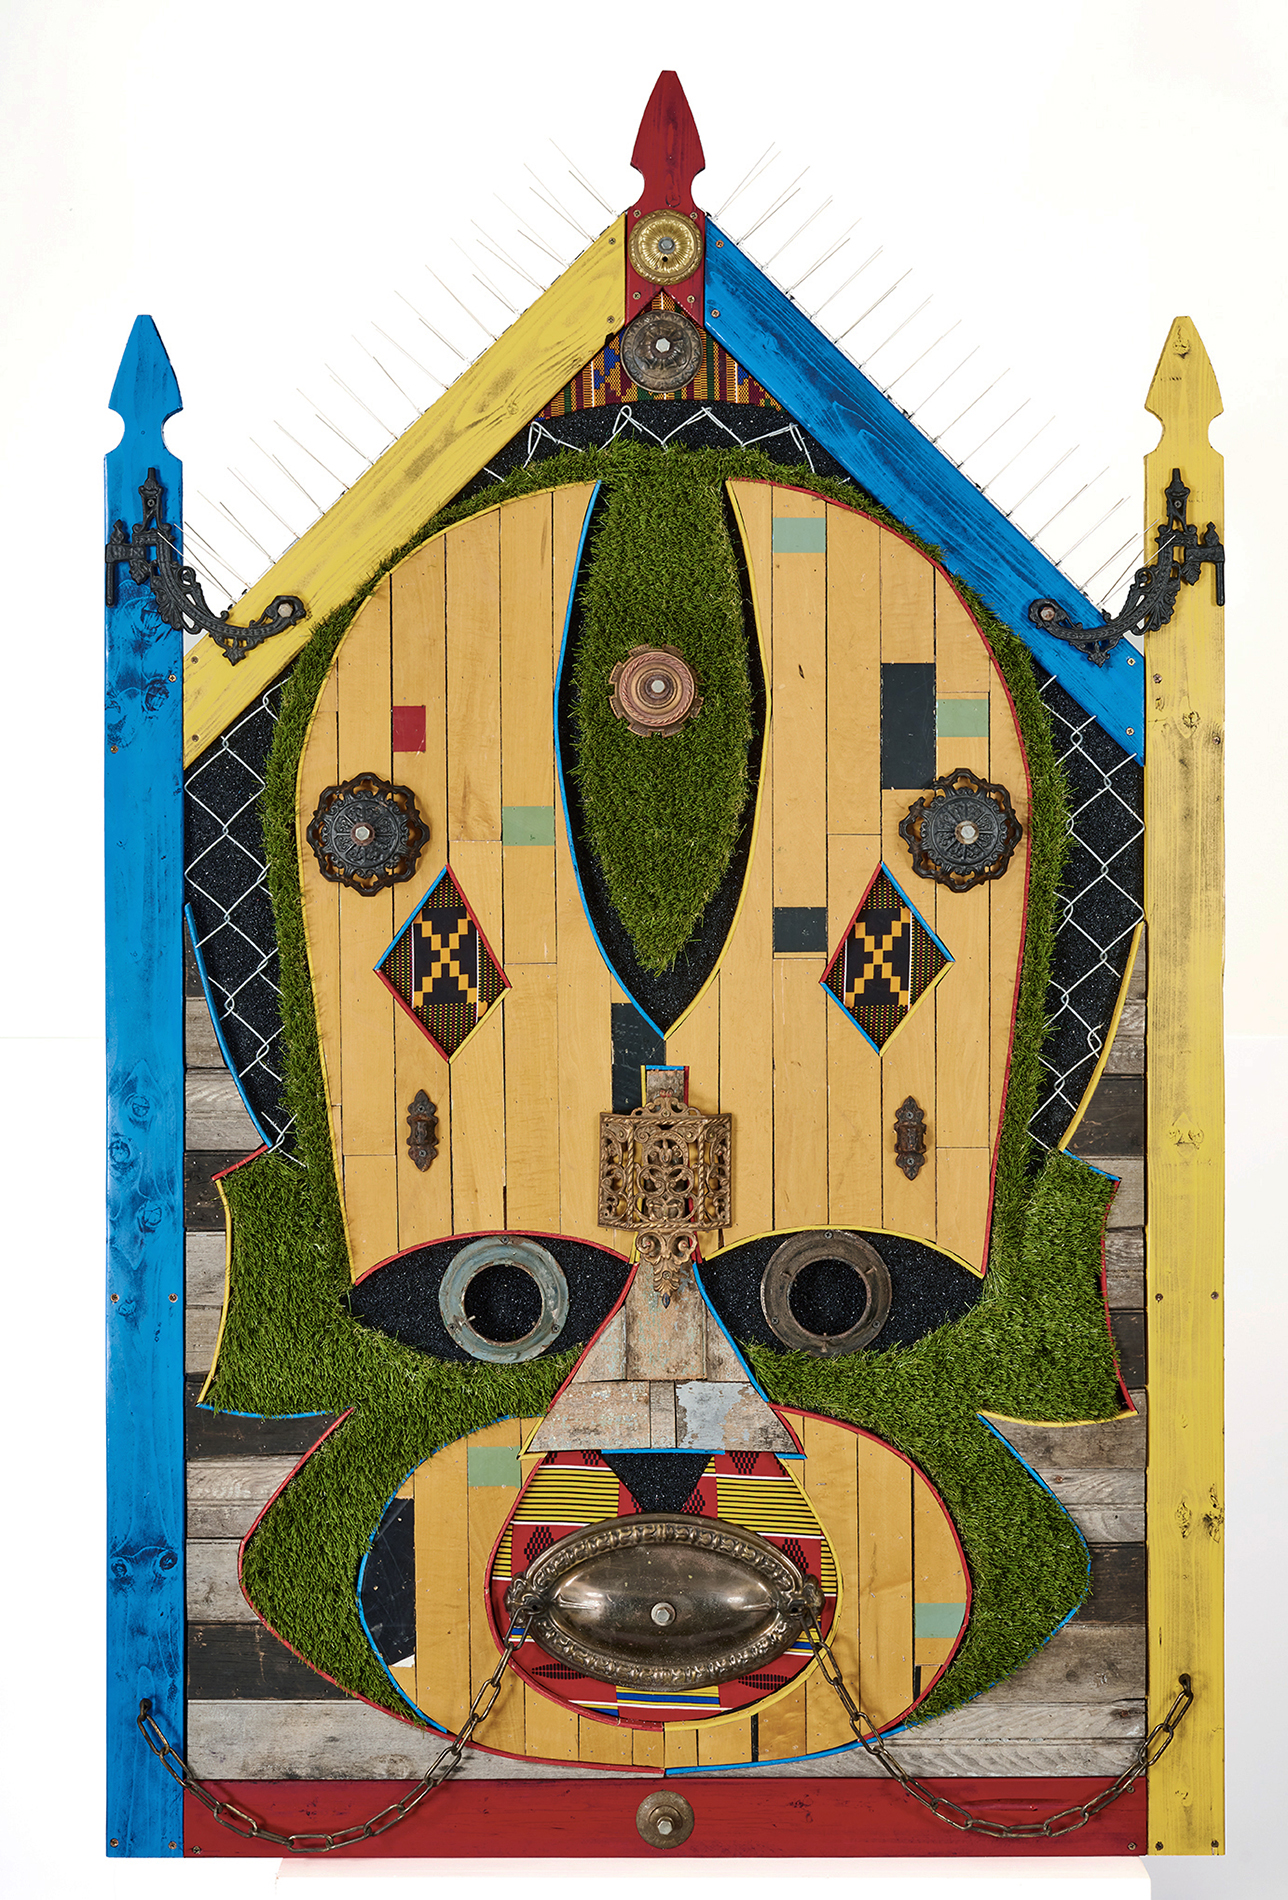 Sentinel, The Guardian; by Aaron Coleman. A mixed media assemblage evoking Ghanaian masks, made from fencing, fake turf, and salvaged wood from a neighbor's home lost to gentrification.